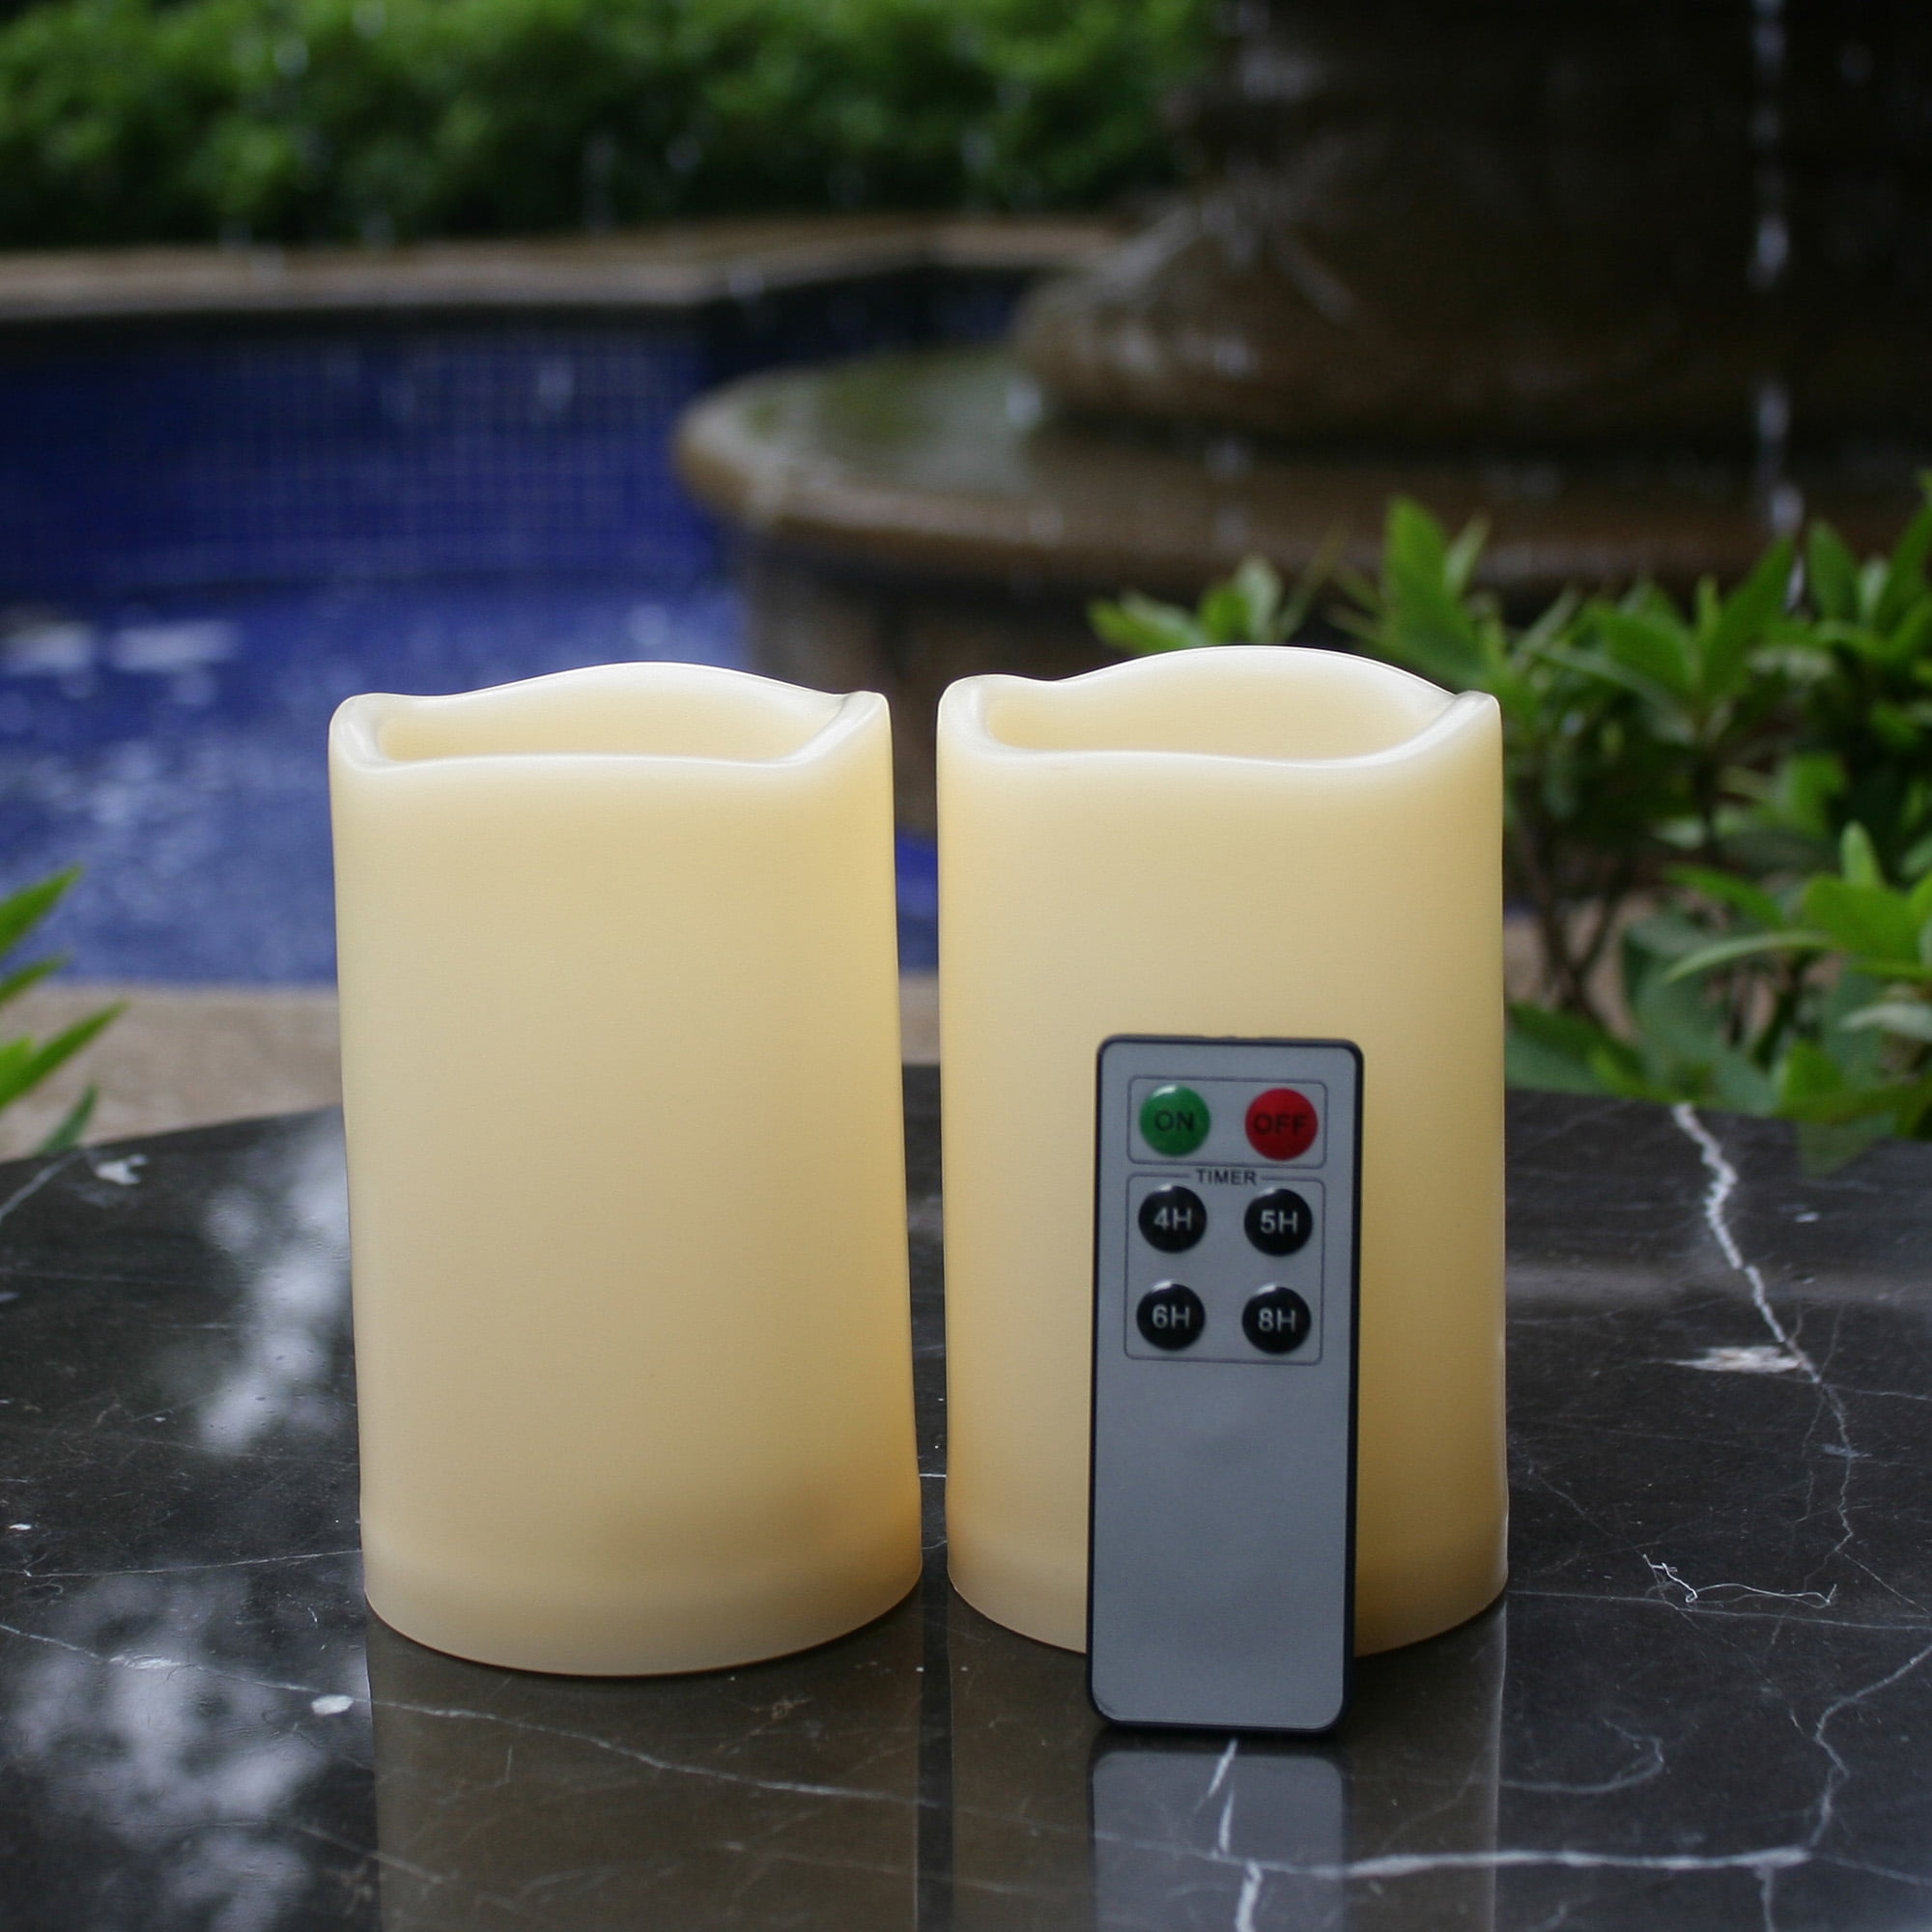 2 Pack 3” x 5” Waterproof Outdoor Flameless Pillar Candles with Timer Battery Operated Electric LED Candle Set for Gift Home Décor Party Wedding Supplies Garden Halloween Christmas Decoration